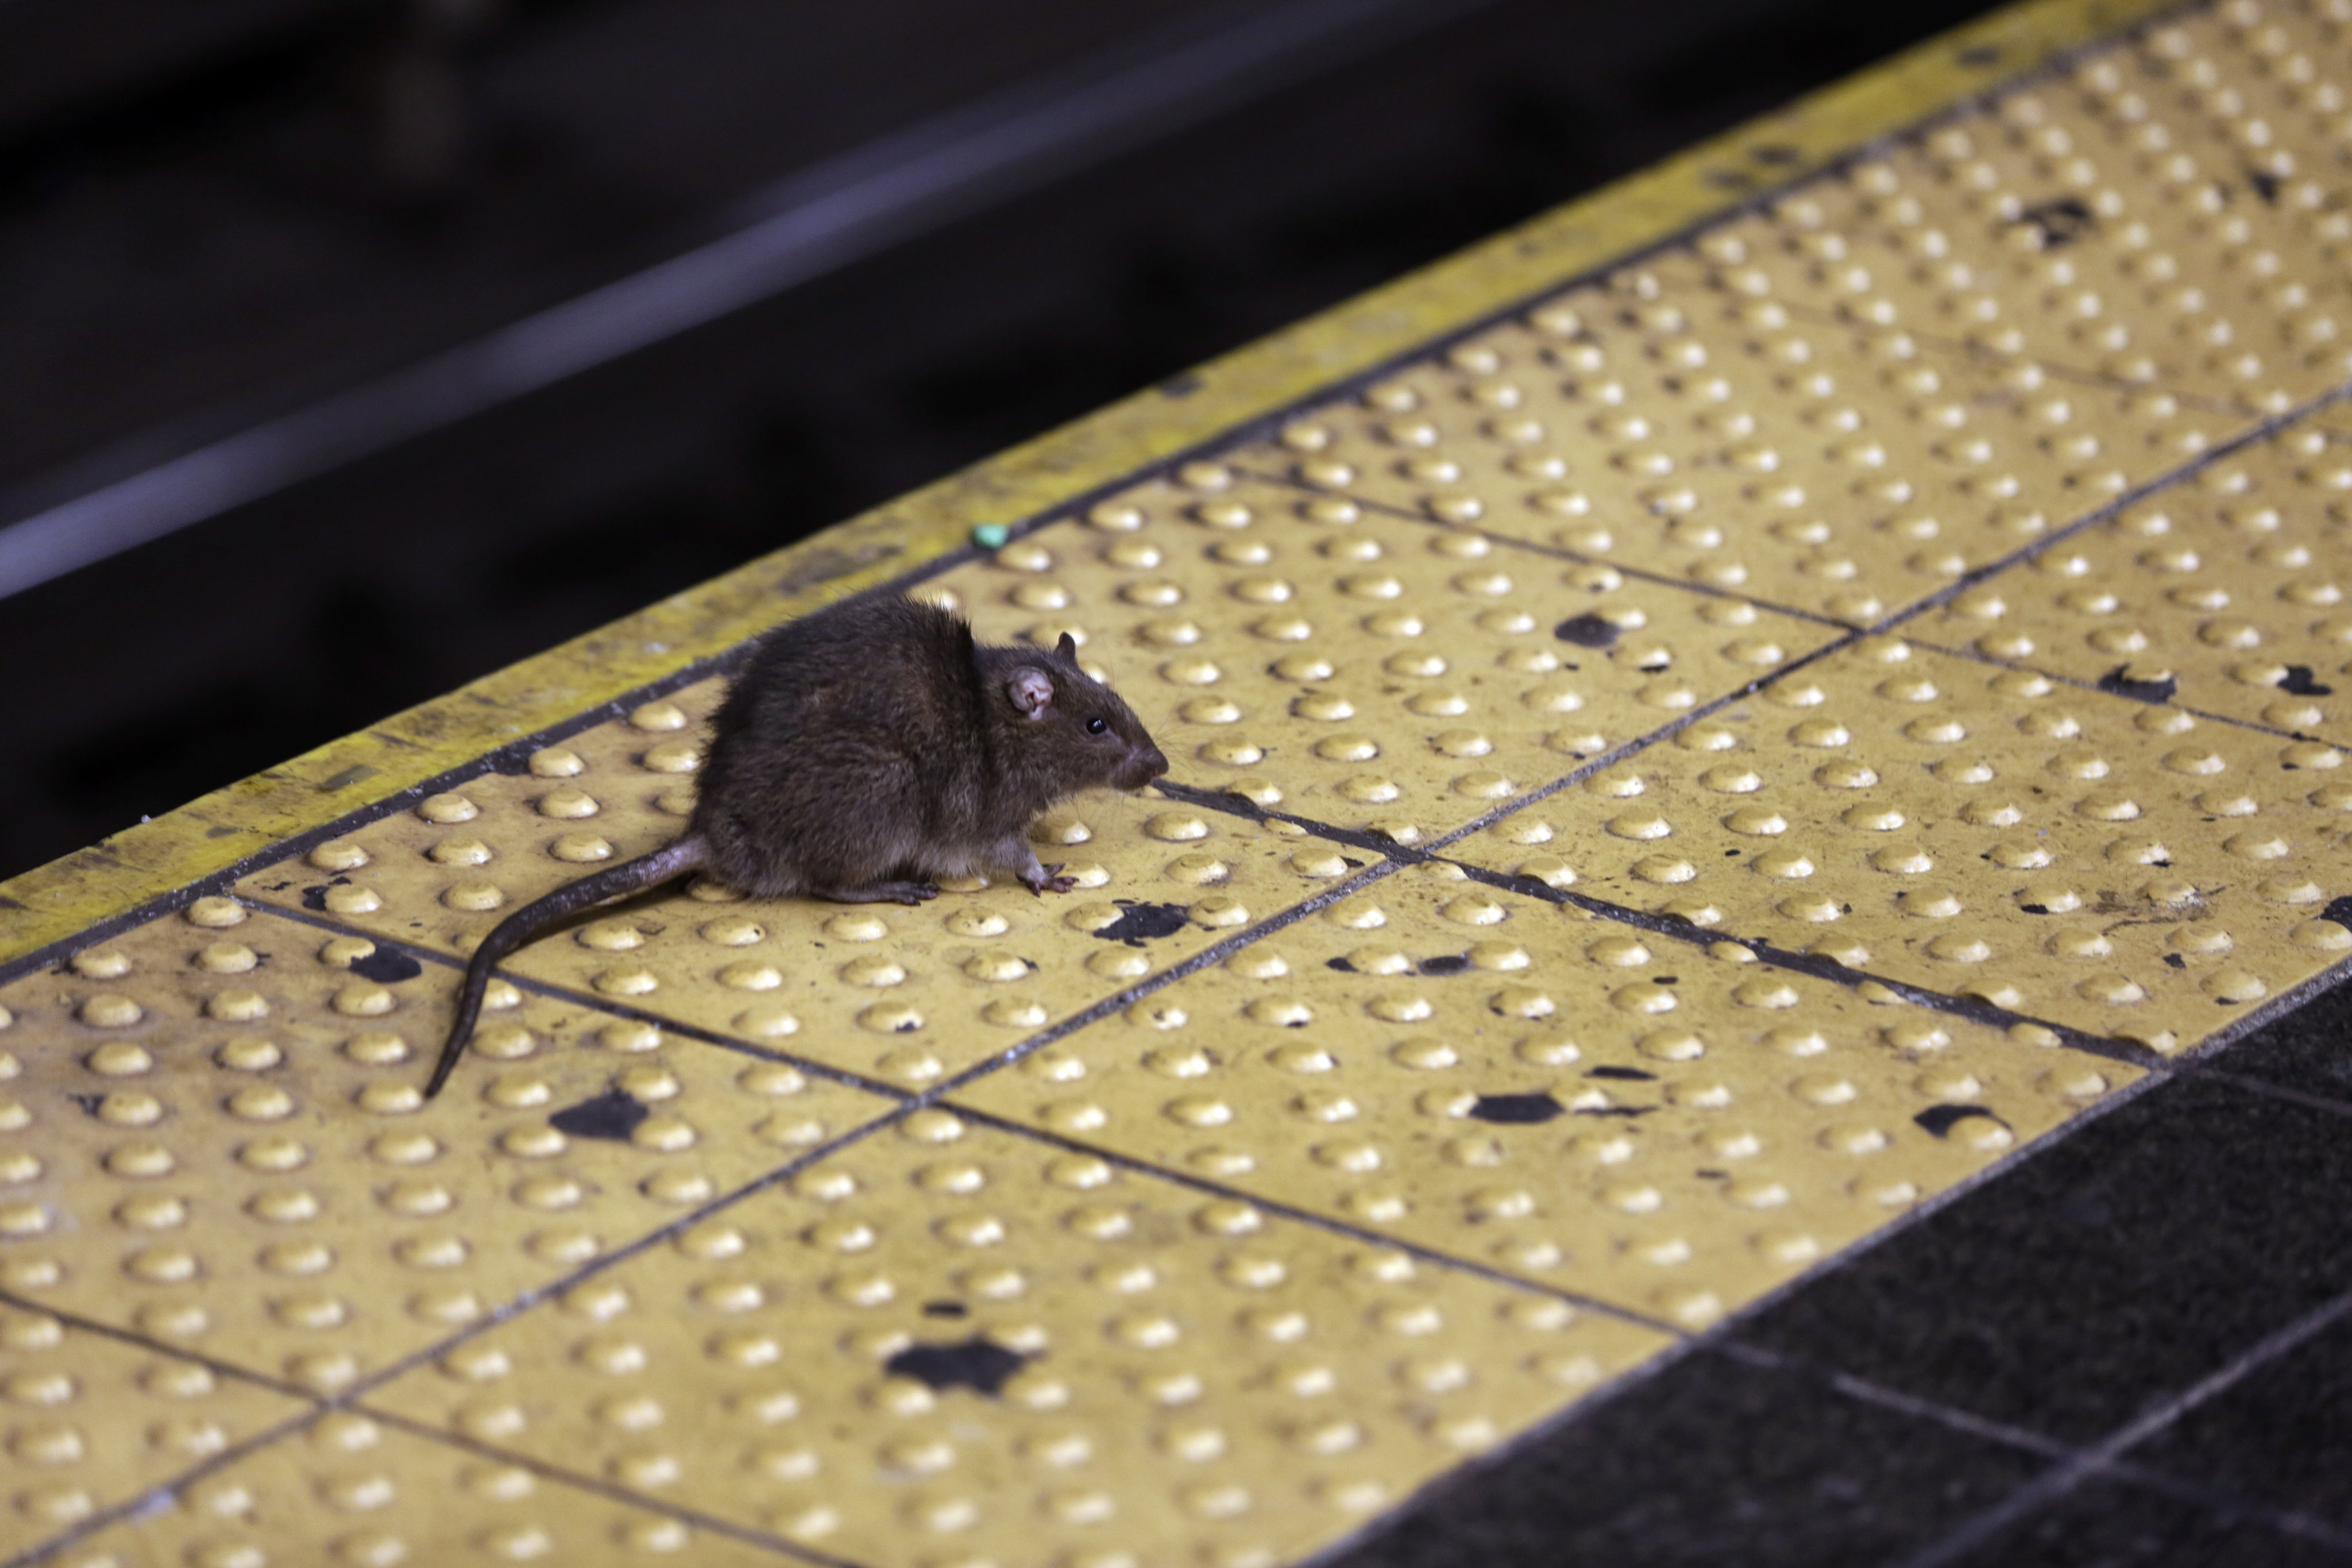 Health authorities have said that the exact mode of transmission of rat hepatitis E virus to humans currently remains unknown. Photo: AP